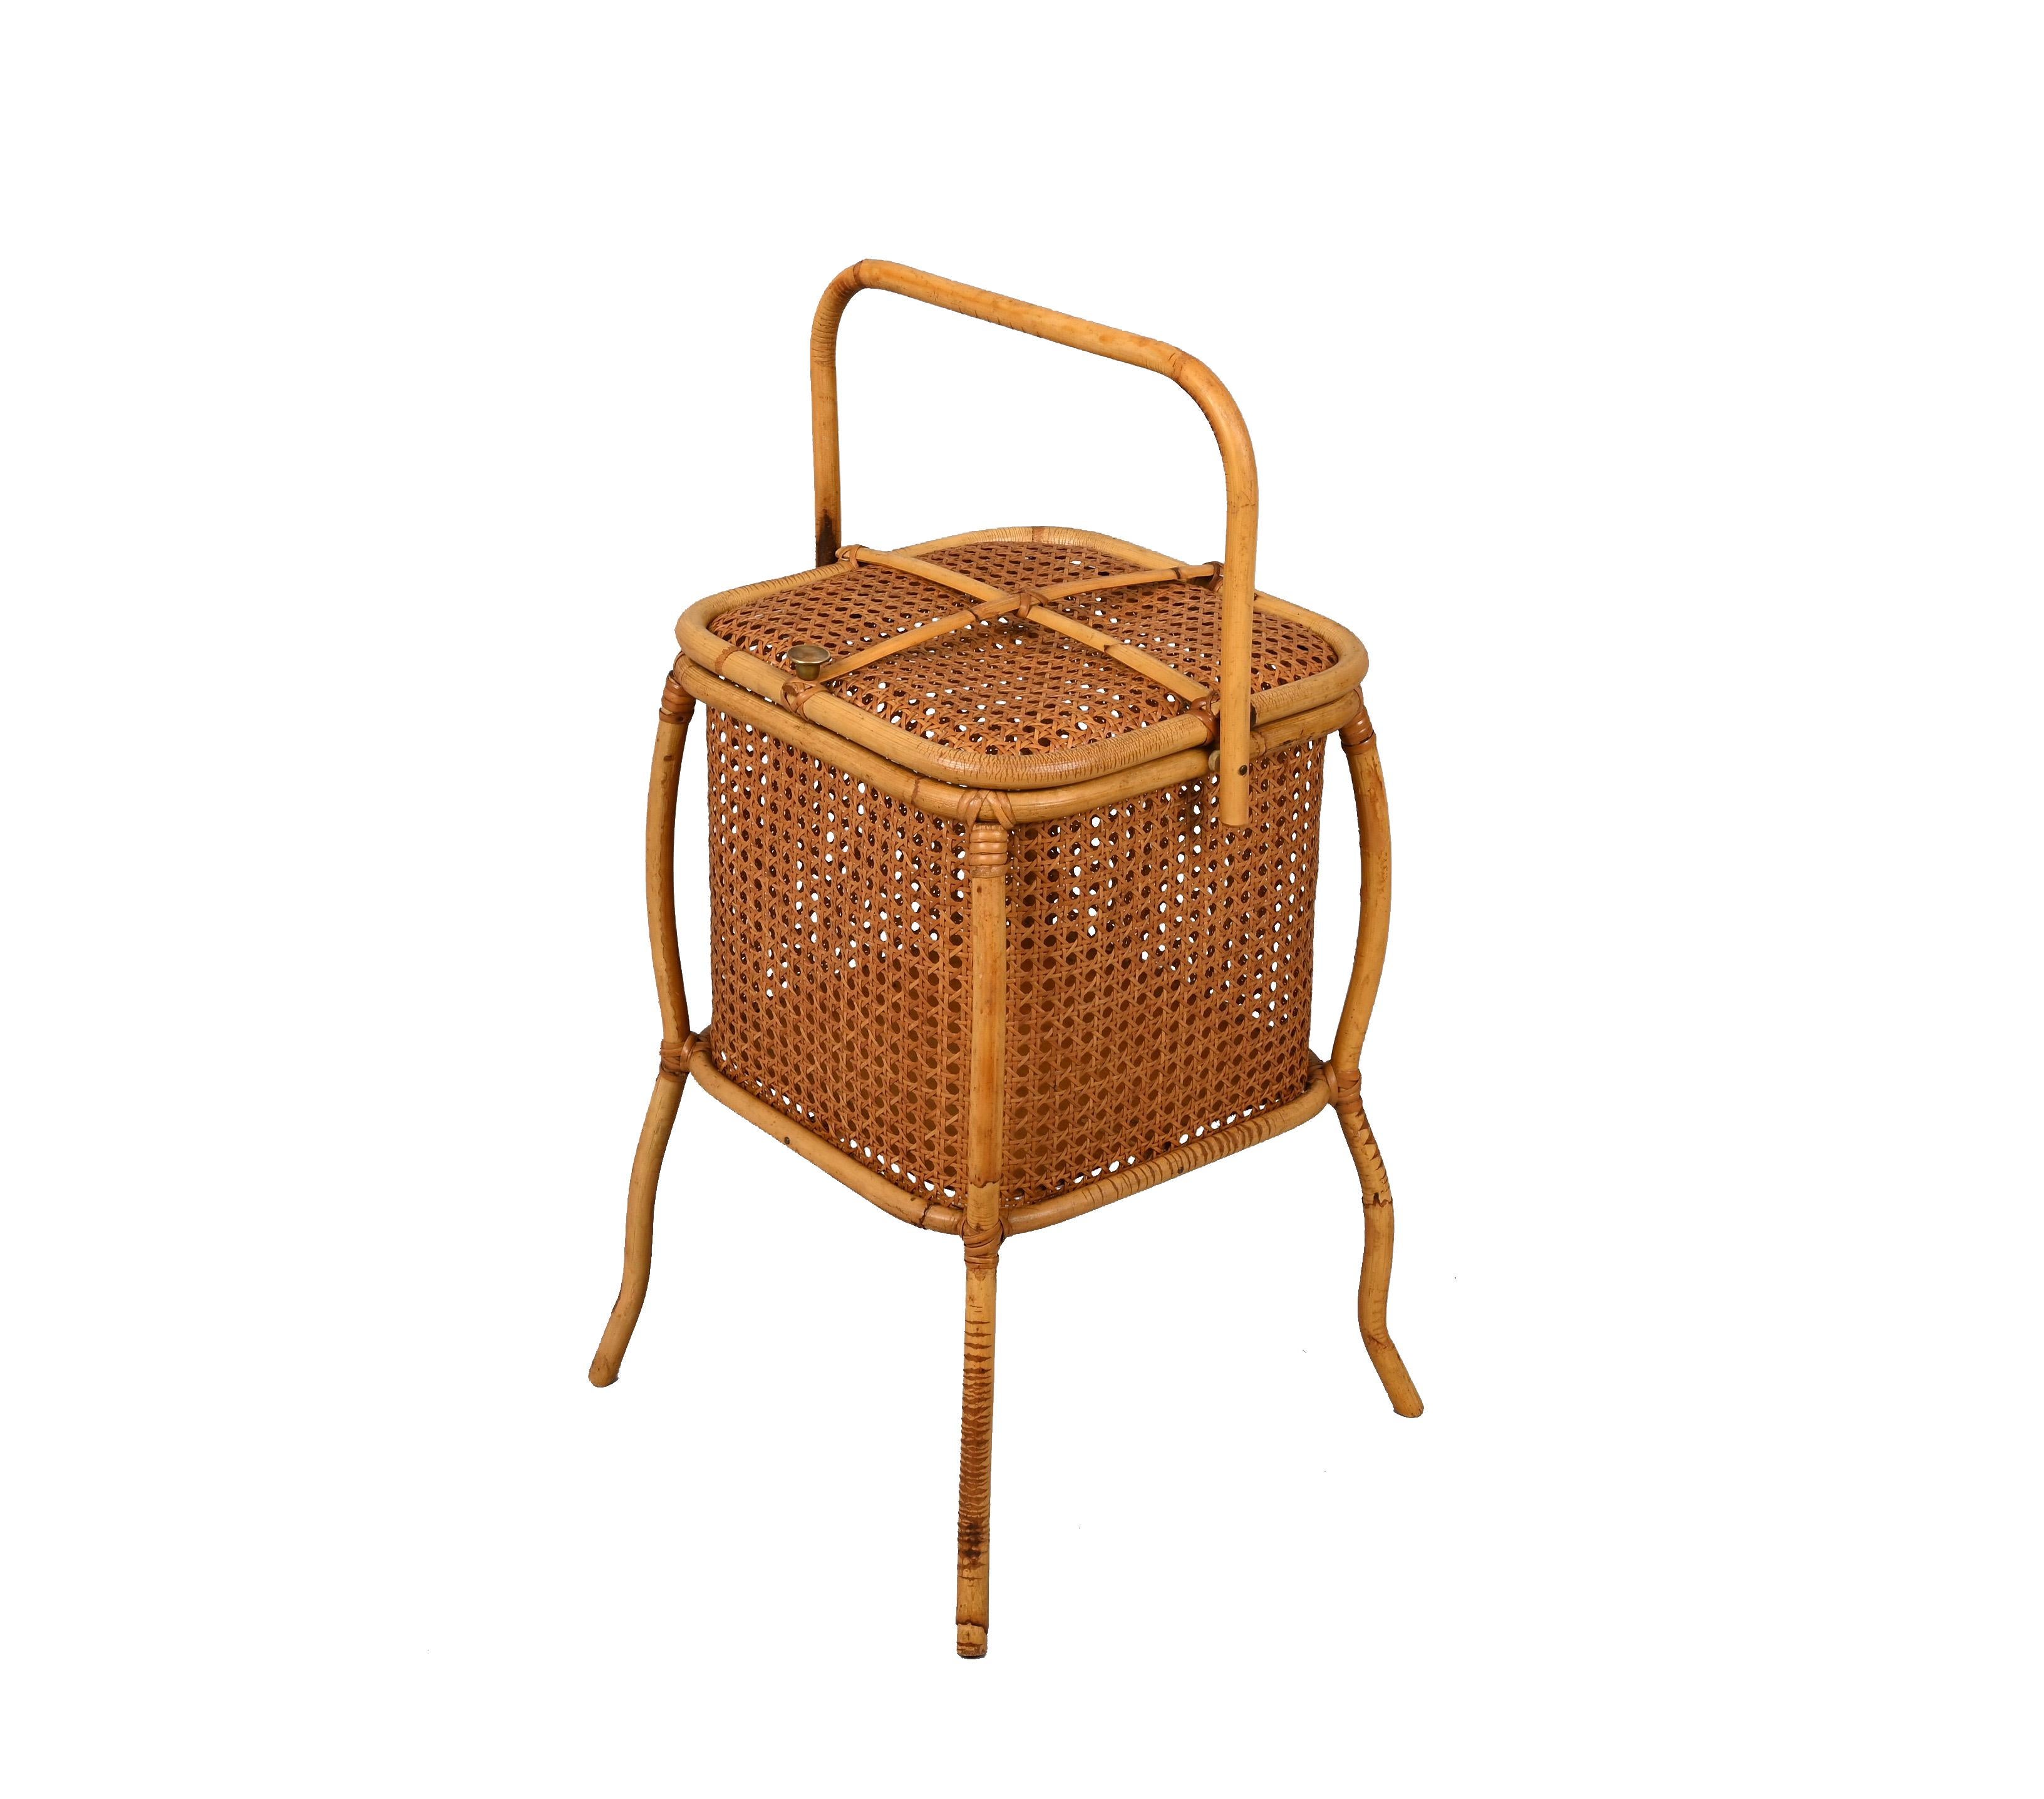 Unique midcentury magazine rack in bamboo cane, Vienna straw and rattan with a brass knob. This fantastic piece was made in Italy during the 1960s.

This astonishing item is fantastic as the shape of the item is cubic, with a handler made of a